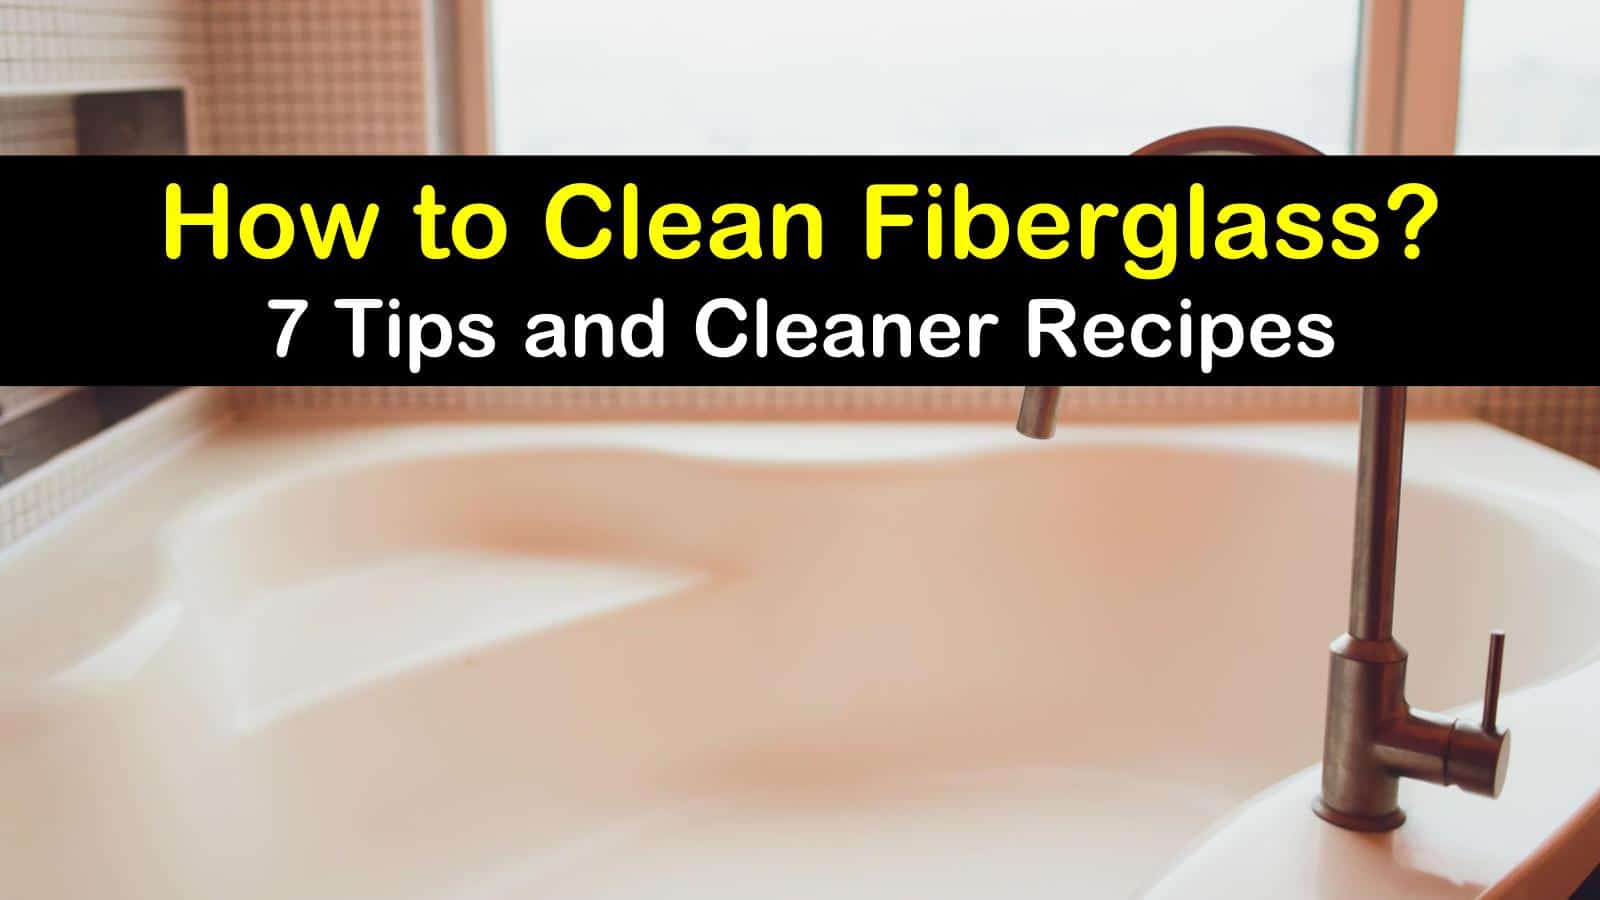 7 Fantastic Ways To Clean Fiberglass, How To Get Rust Stains Out Of A Fiberglass Bathtub